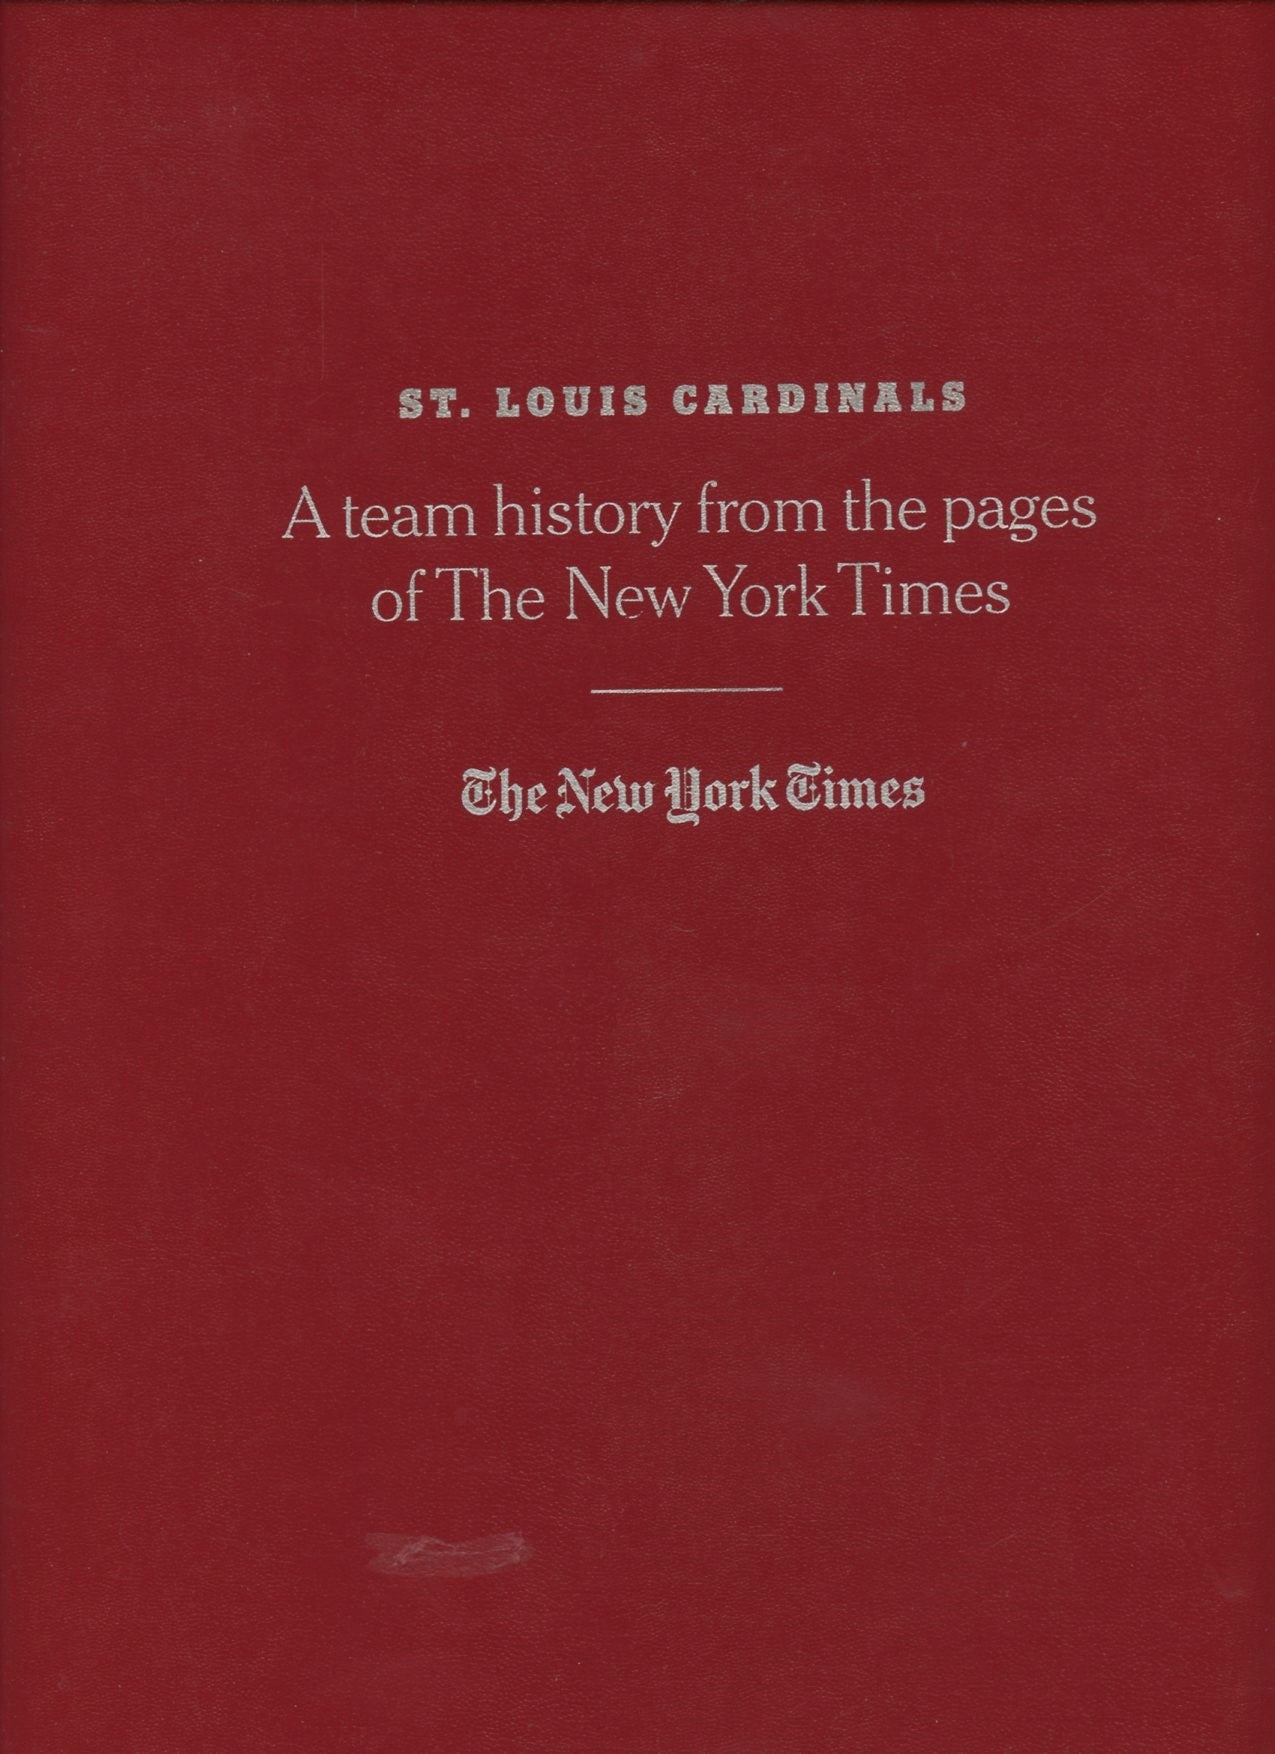 The St. Louis Cardinals: In This Book You Will Find a History of the St. Louis  Cardinals as Told Through the Pages of The New York Times